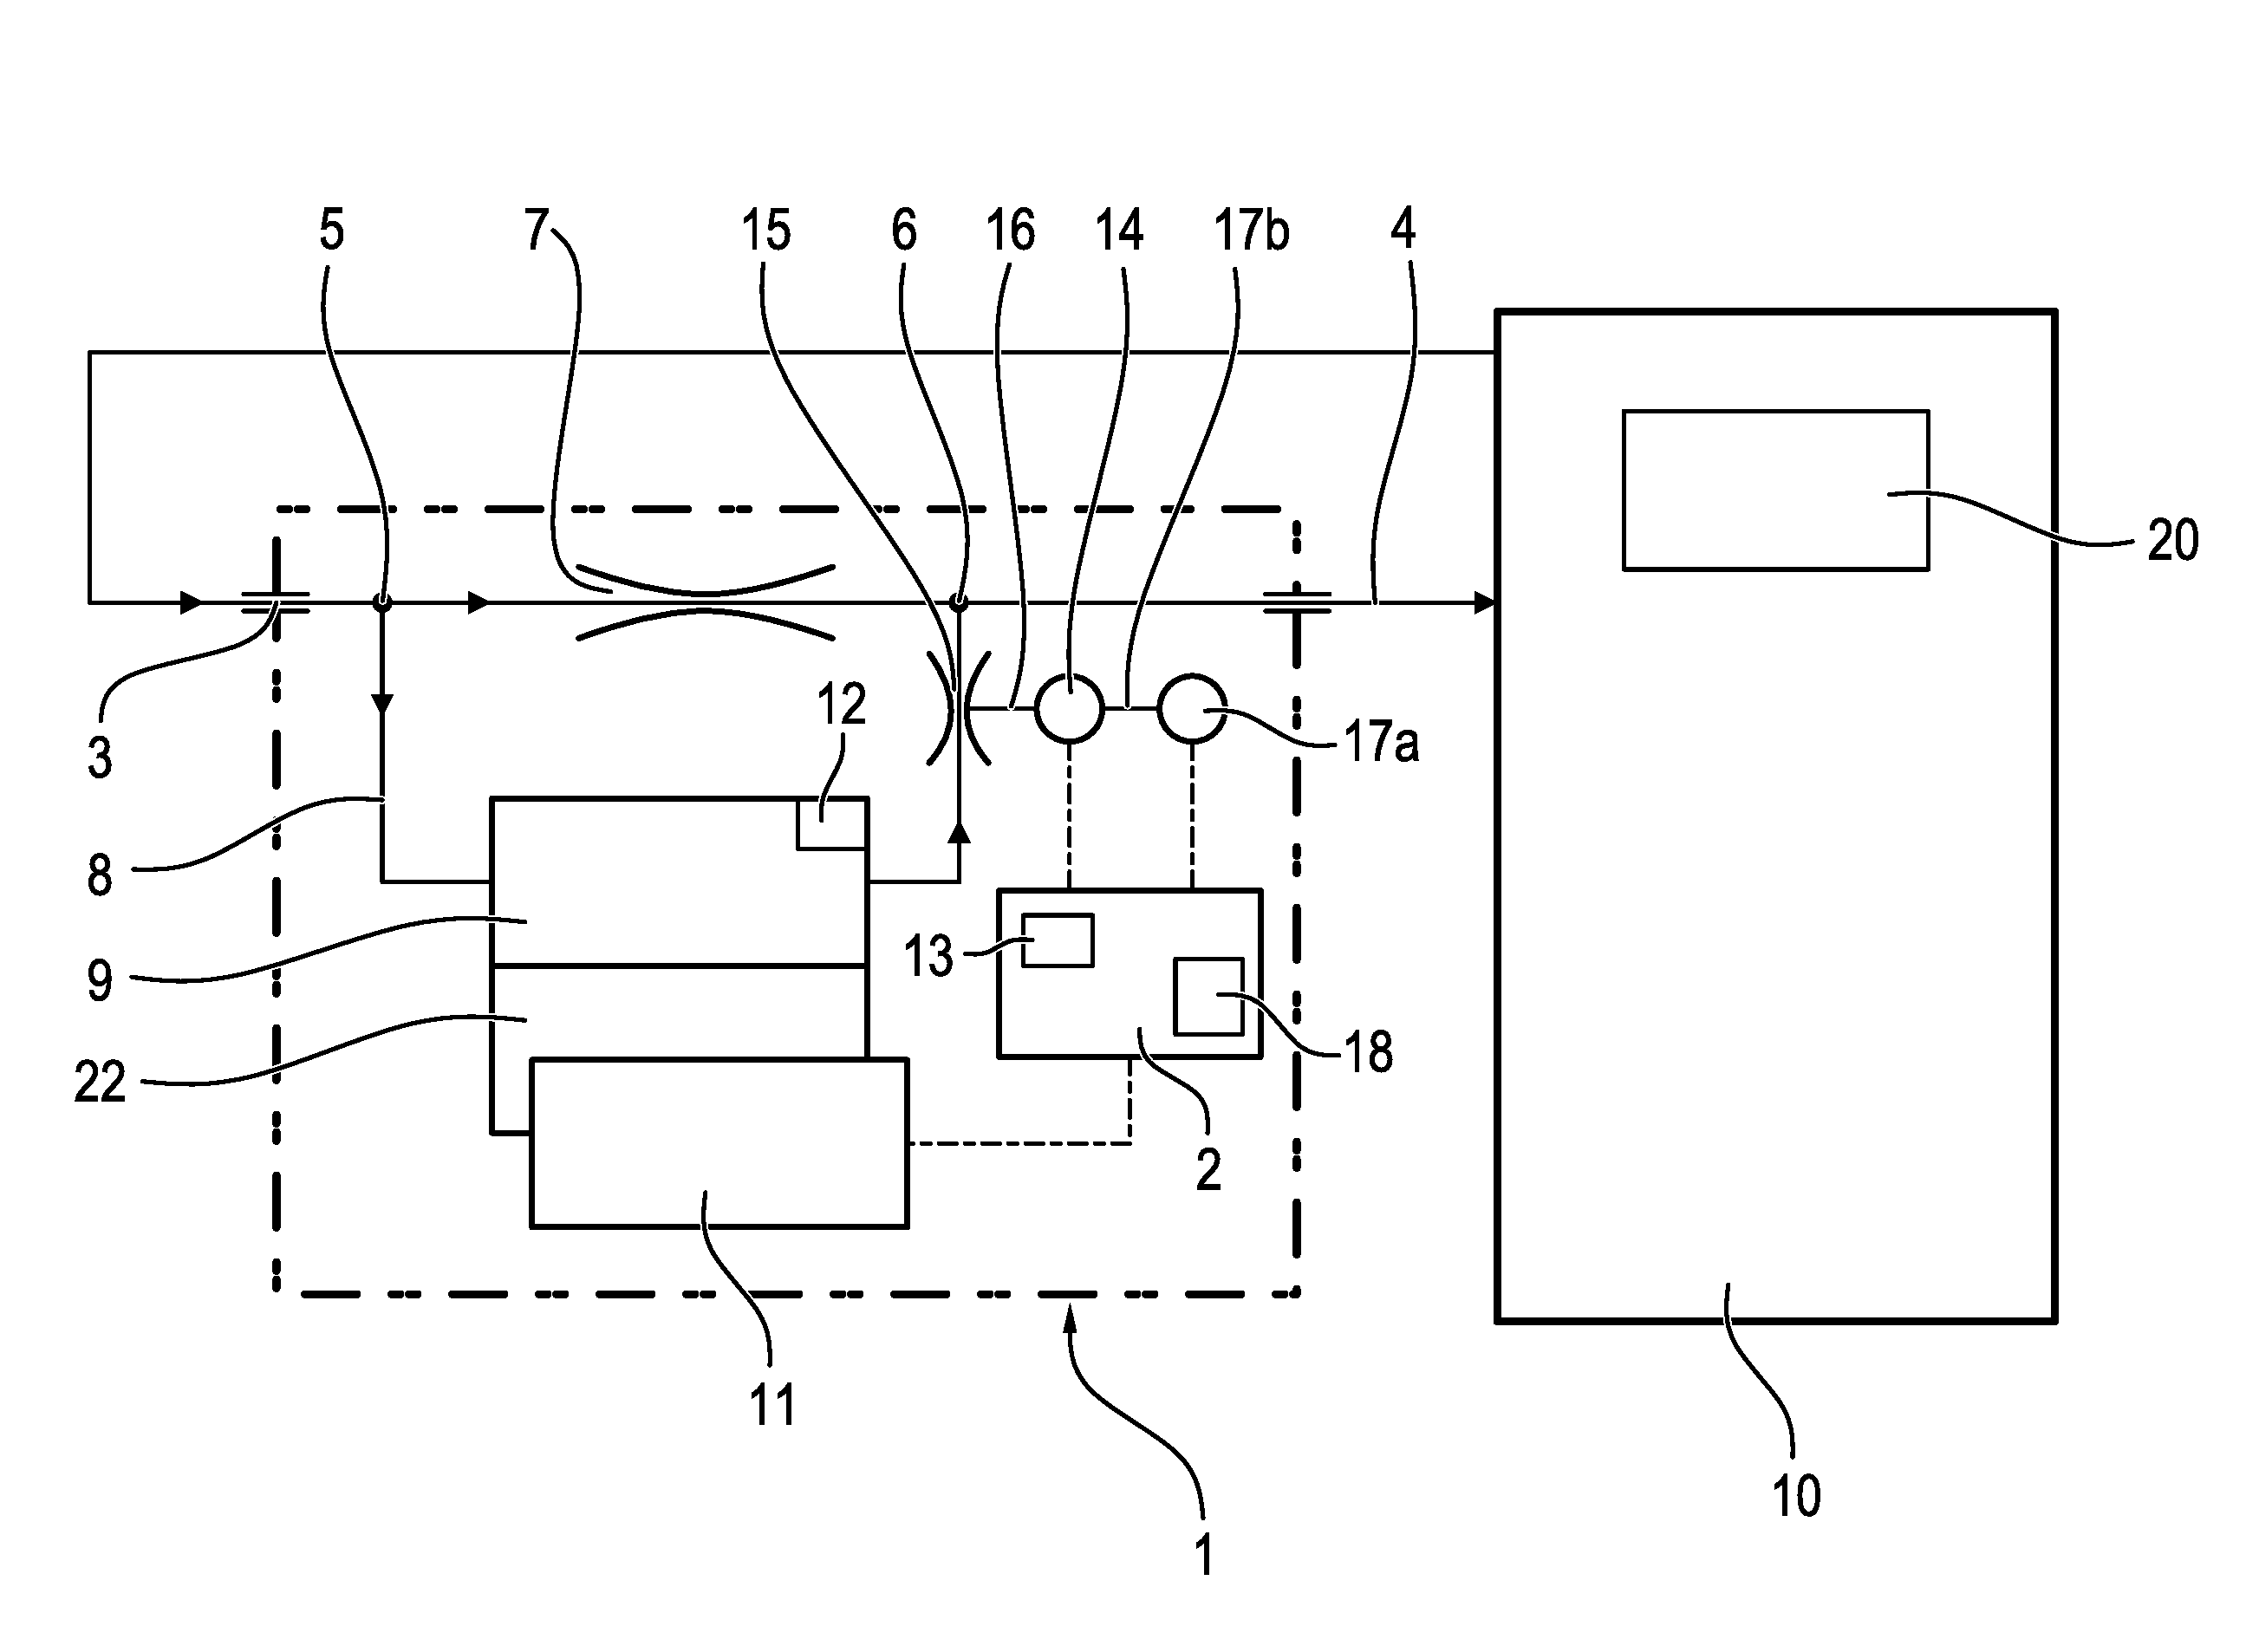 Anesthetic dispensing device